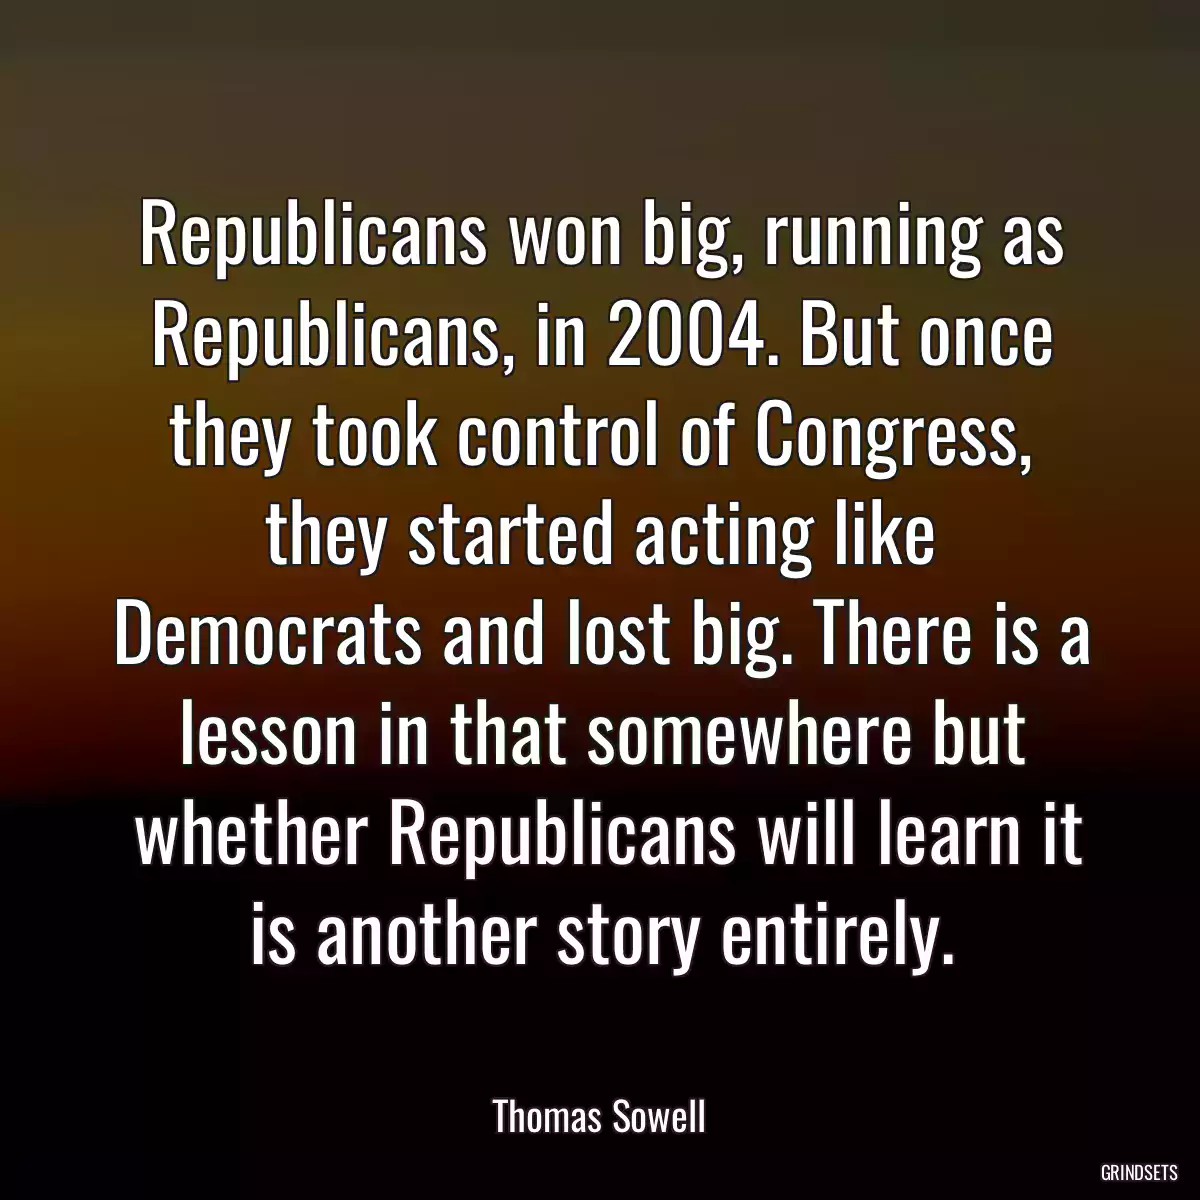 Republicans won big, running as Republicans, in 2004. But once they took control of Congress, they started acting like Democrats and lost big. There is a lesson in that somewhere but
 whether Republicans will learn it is another story entirely.